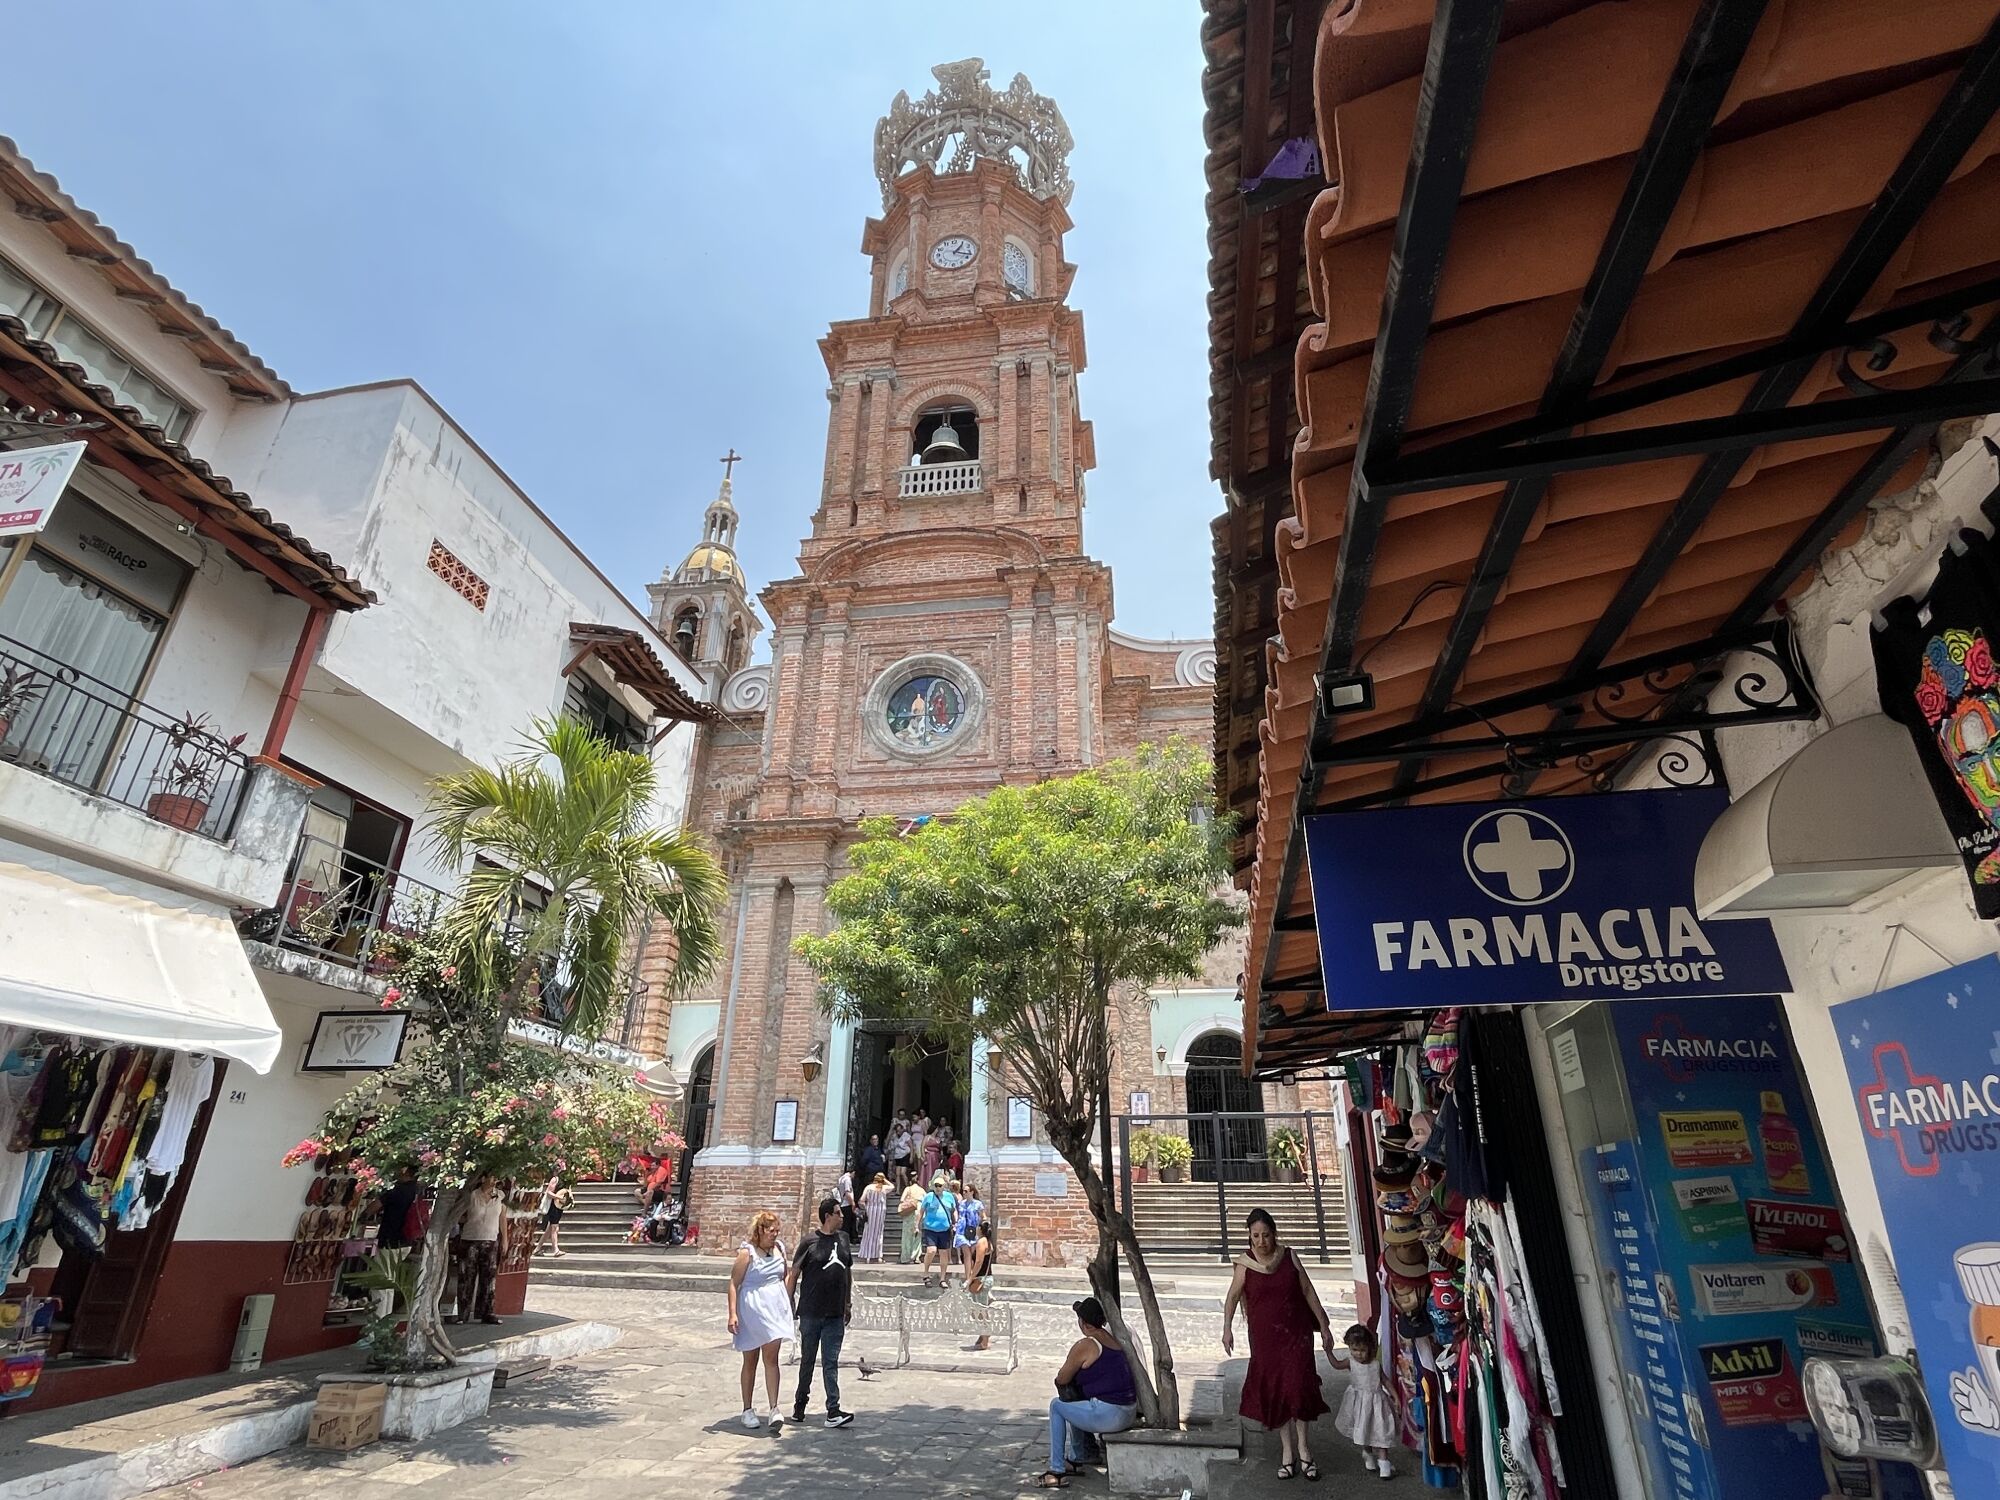 A sign for a pharmacy is seen along a street leading to an ornate church tower.